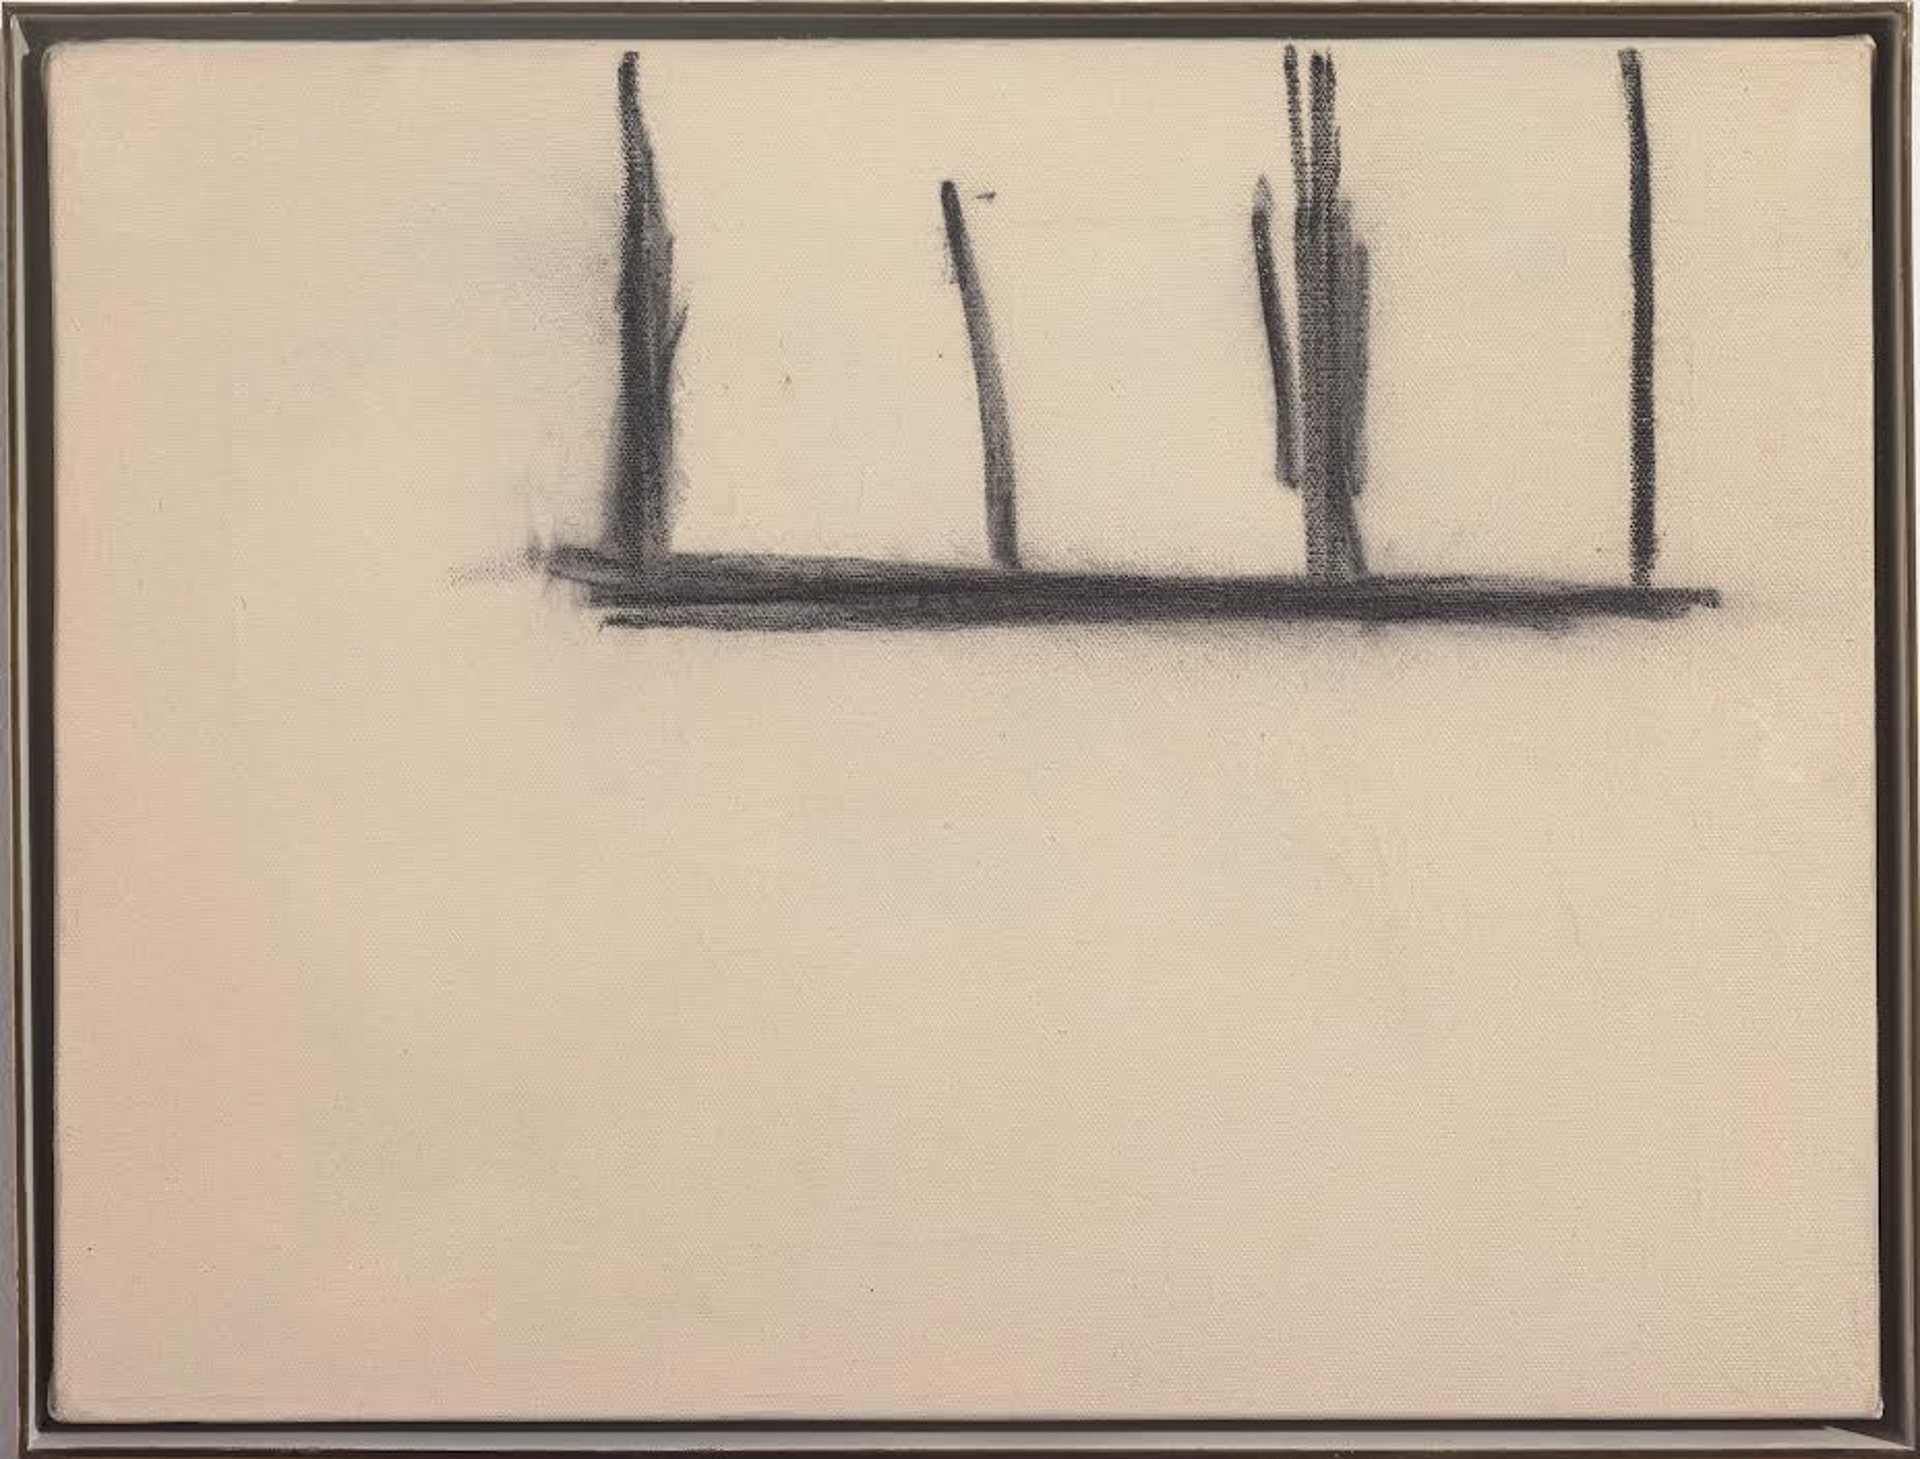 Open No. 140: Charcoal on Cream by Robert Motherwell